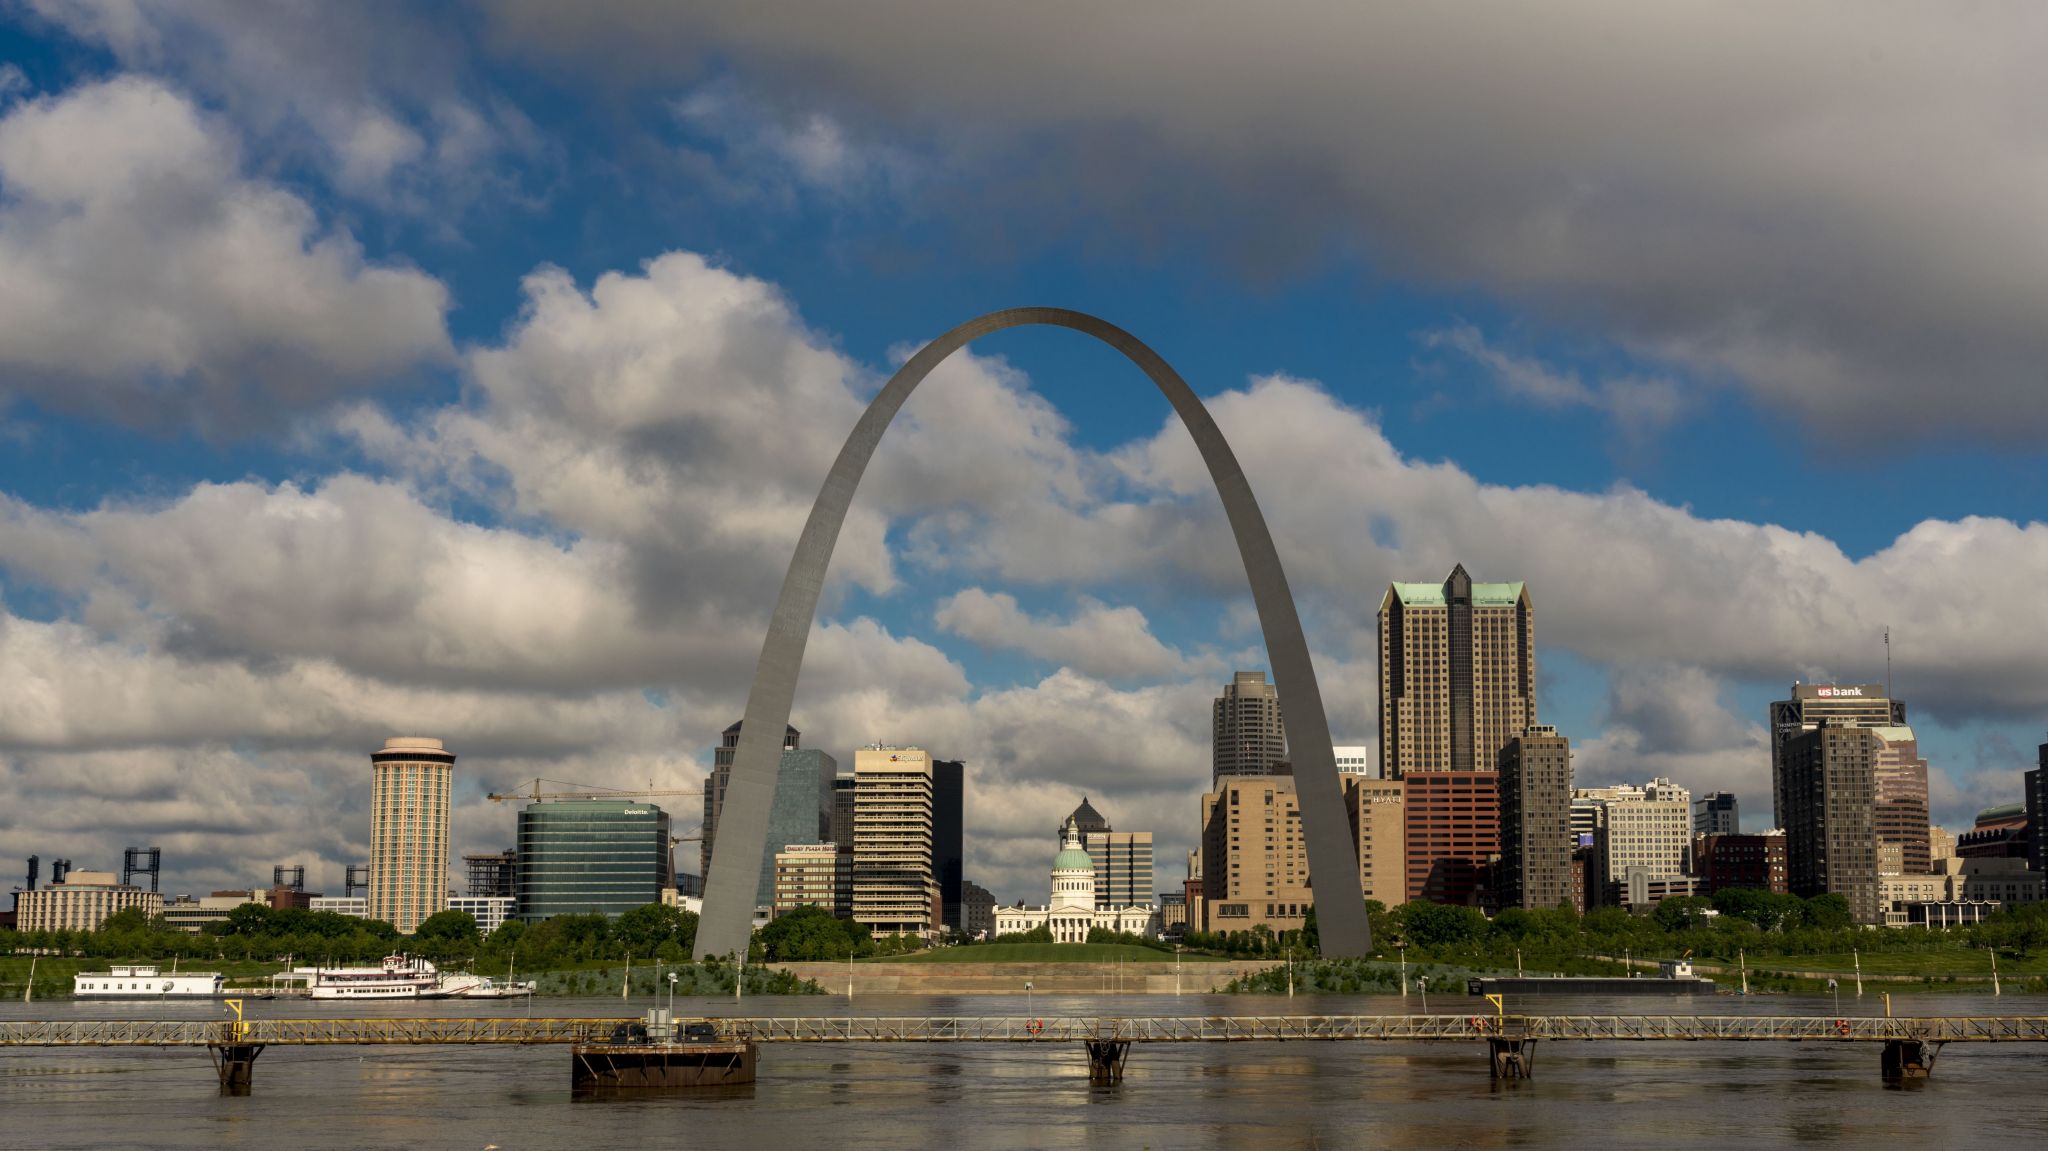 St. Louis ranked 2nd most 'Sinful City' in America in new report